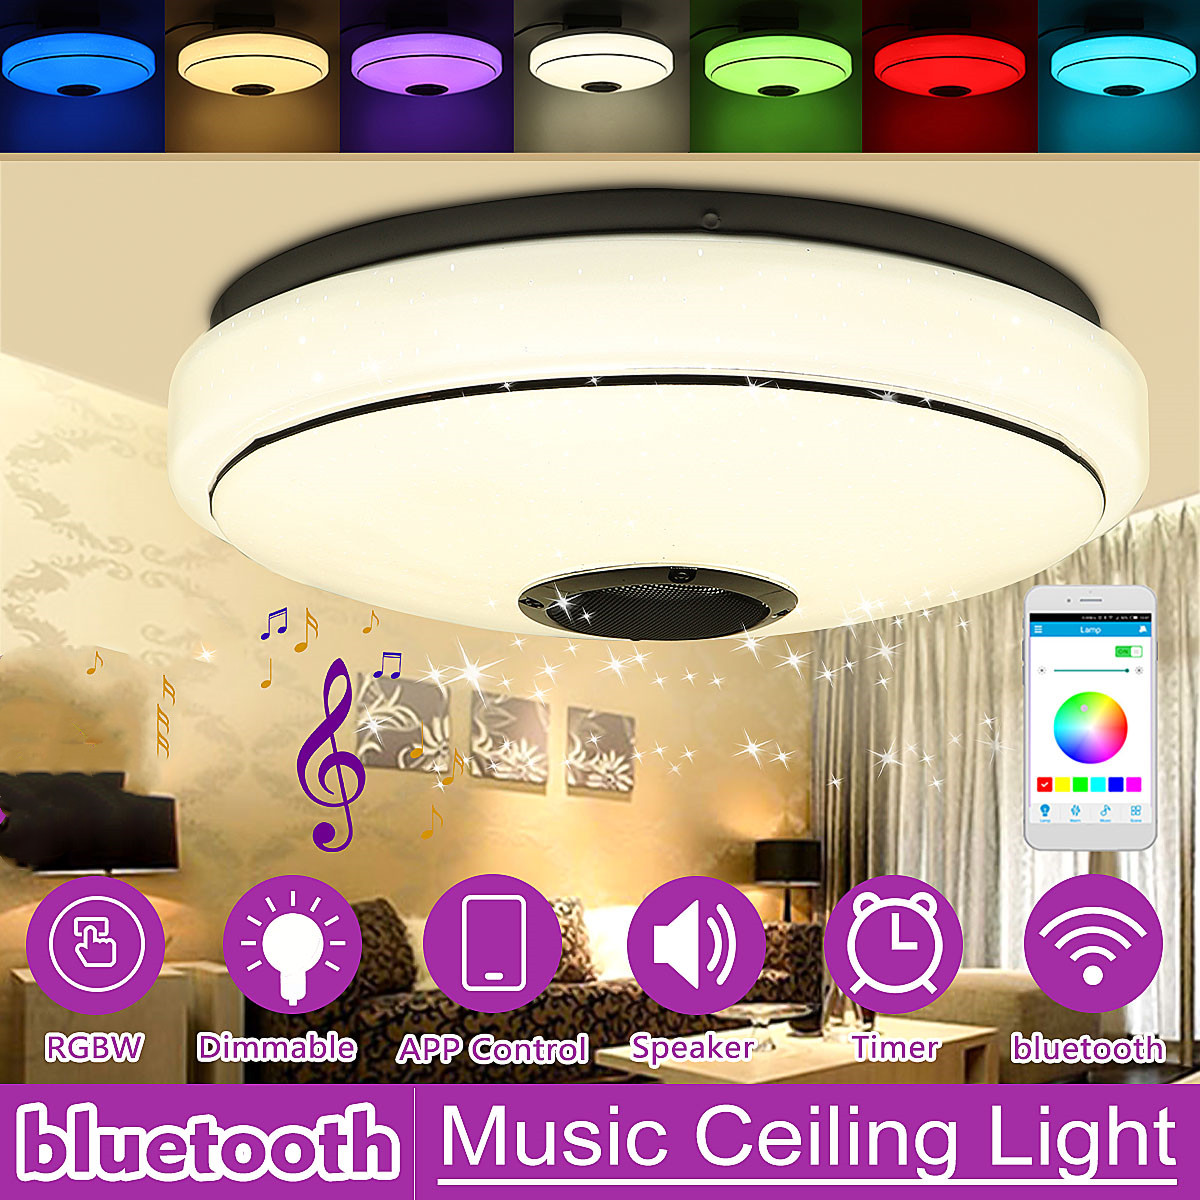 Dimmable-RGBW-LED-Music-Ceiling-Lights-with-bluetooth-Speaker-Cellphone-APP-Control-Color-Changing-L-1742404-2